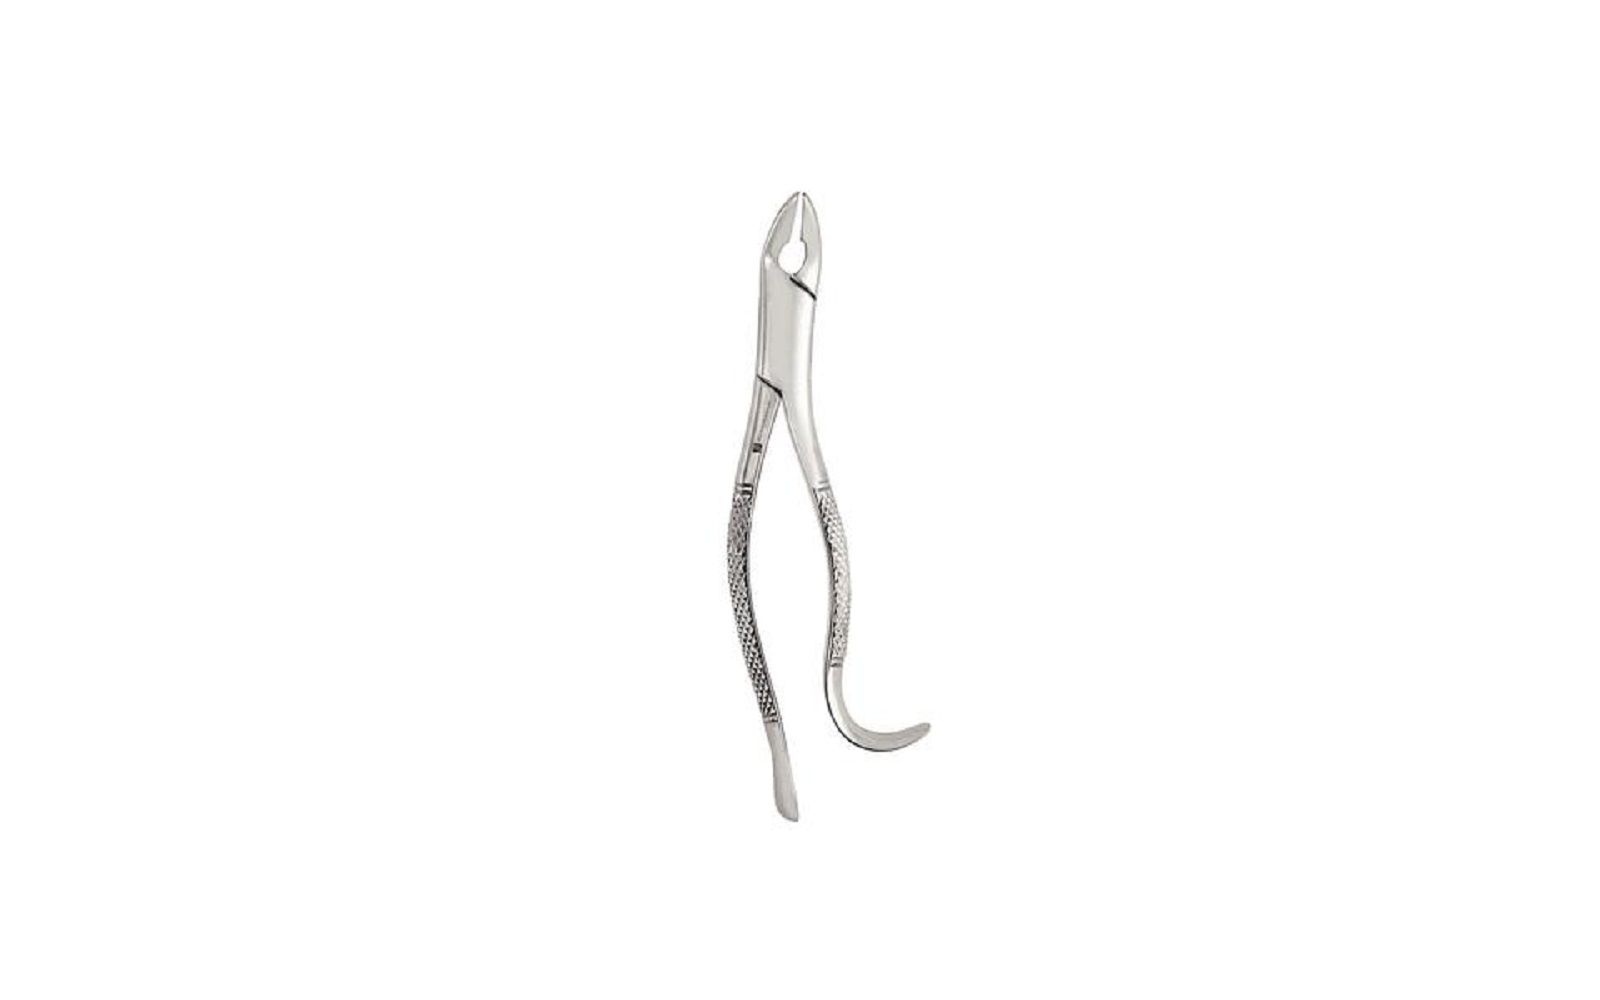 Extracting forceps – # 85a, hook handle